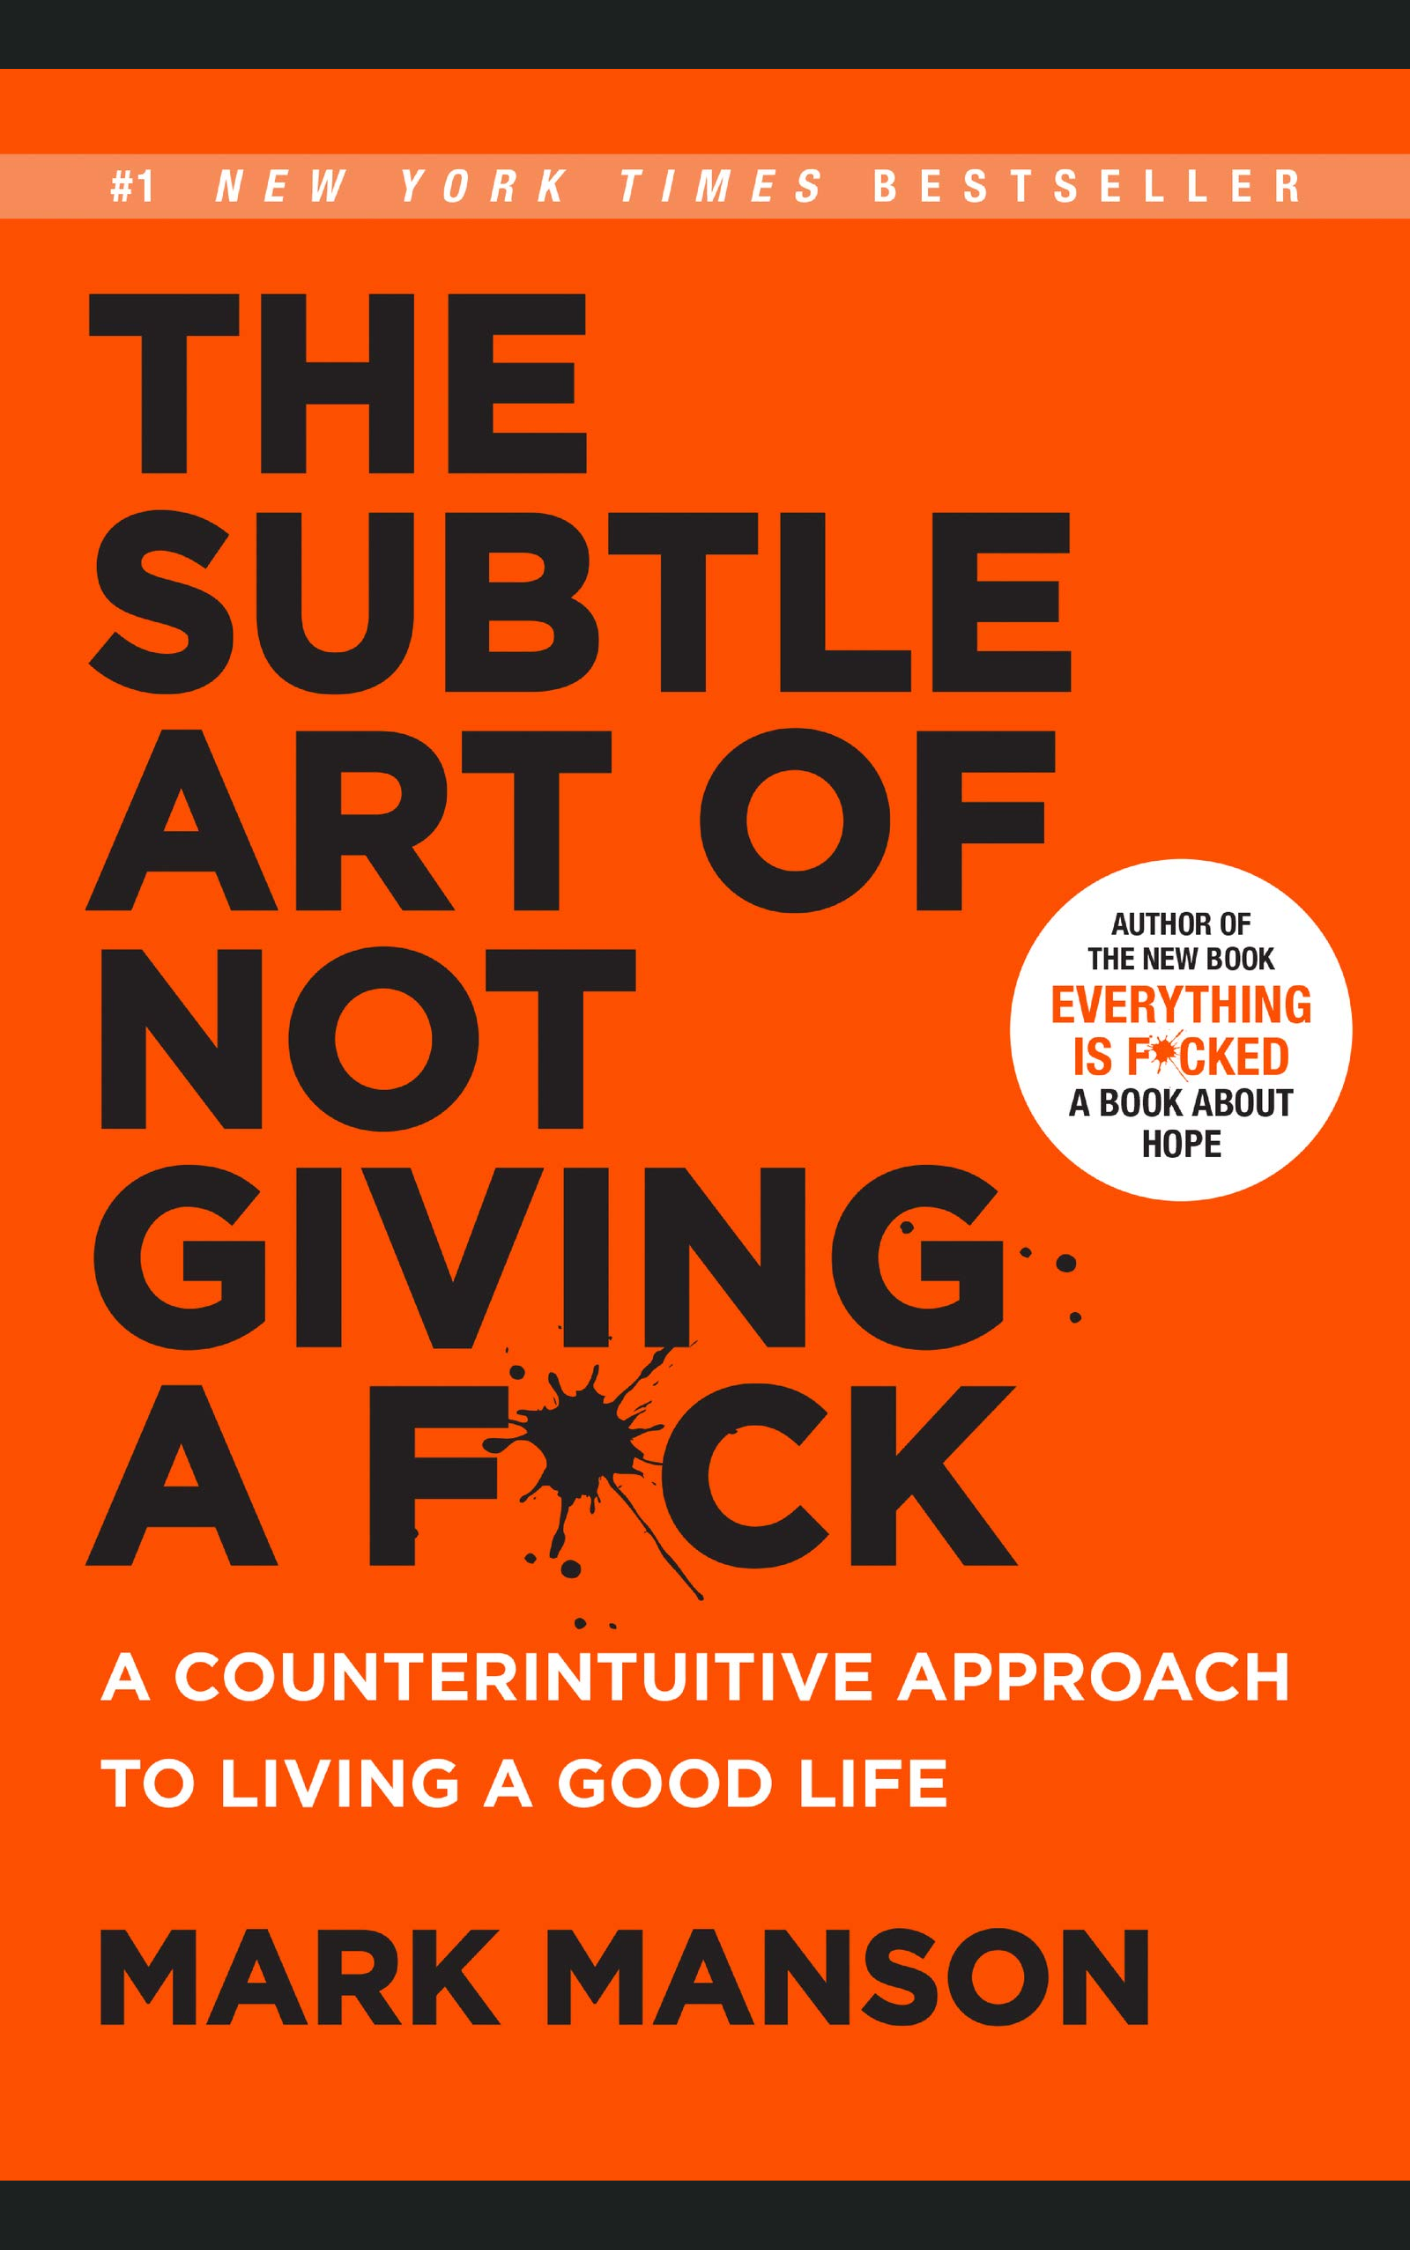 THE SUBTLE ART OF NOT GIVING A FUCK by MARK MANSON